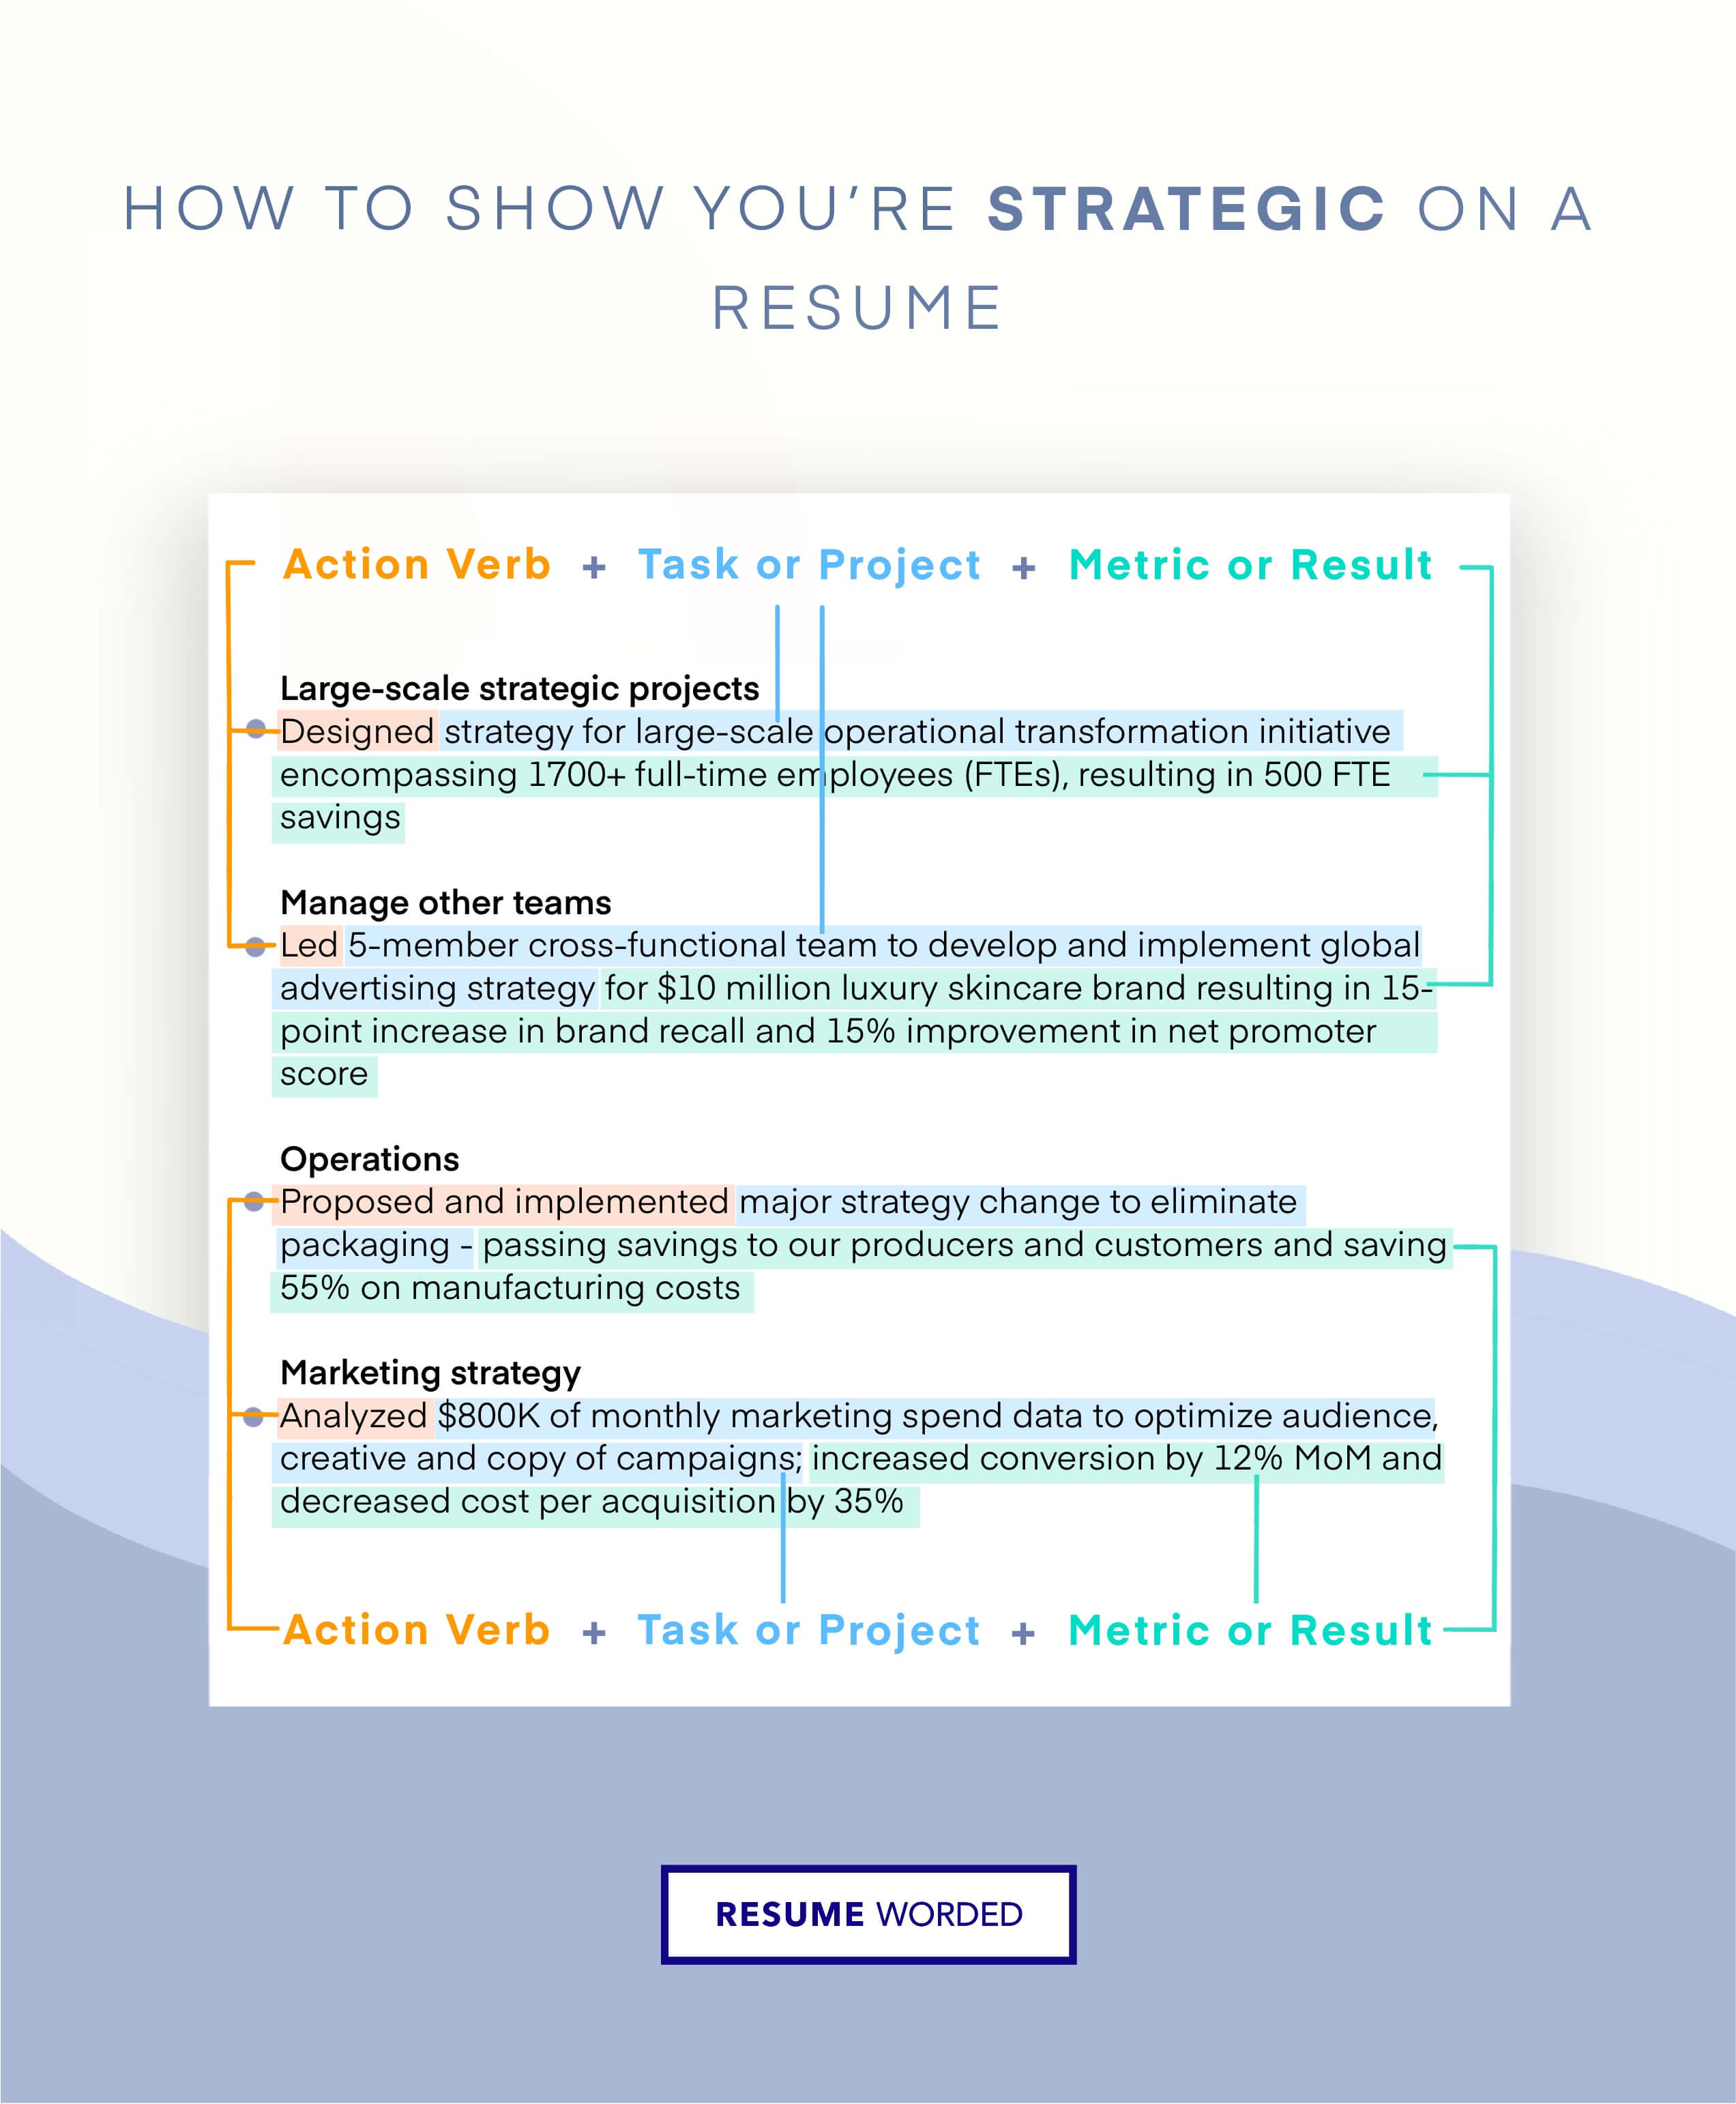 Show your strategic thinking - Brand Director Resume